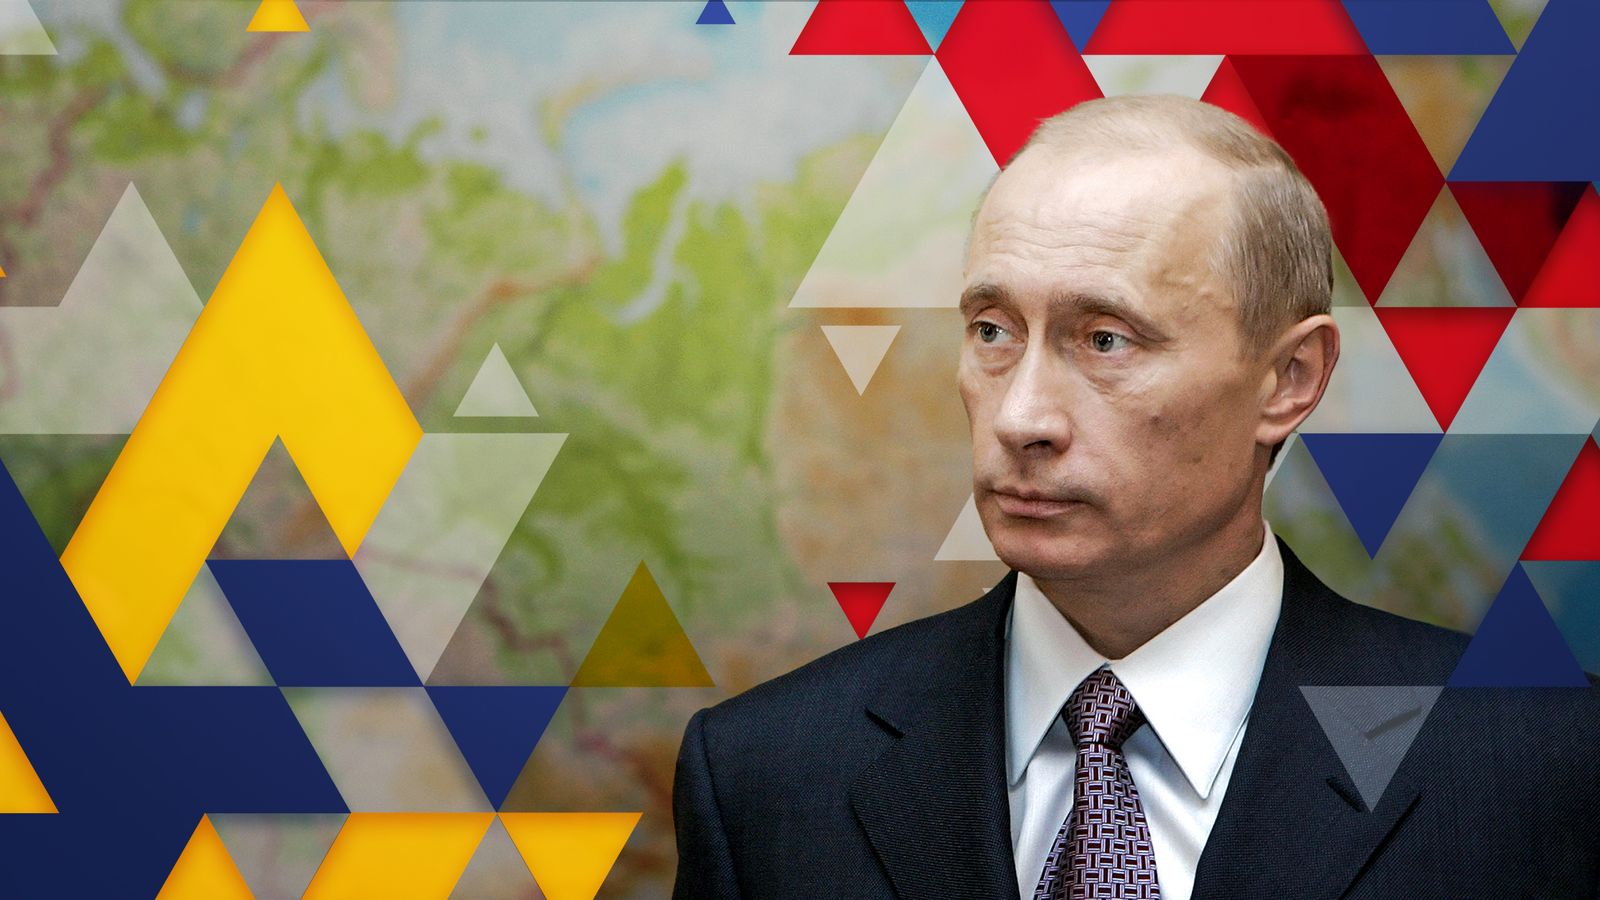 Ukraine War: Putin is a student of history - so what can that tell us about the possible outcomes of Russia's invasion?